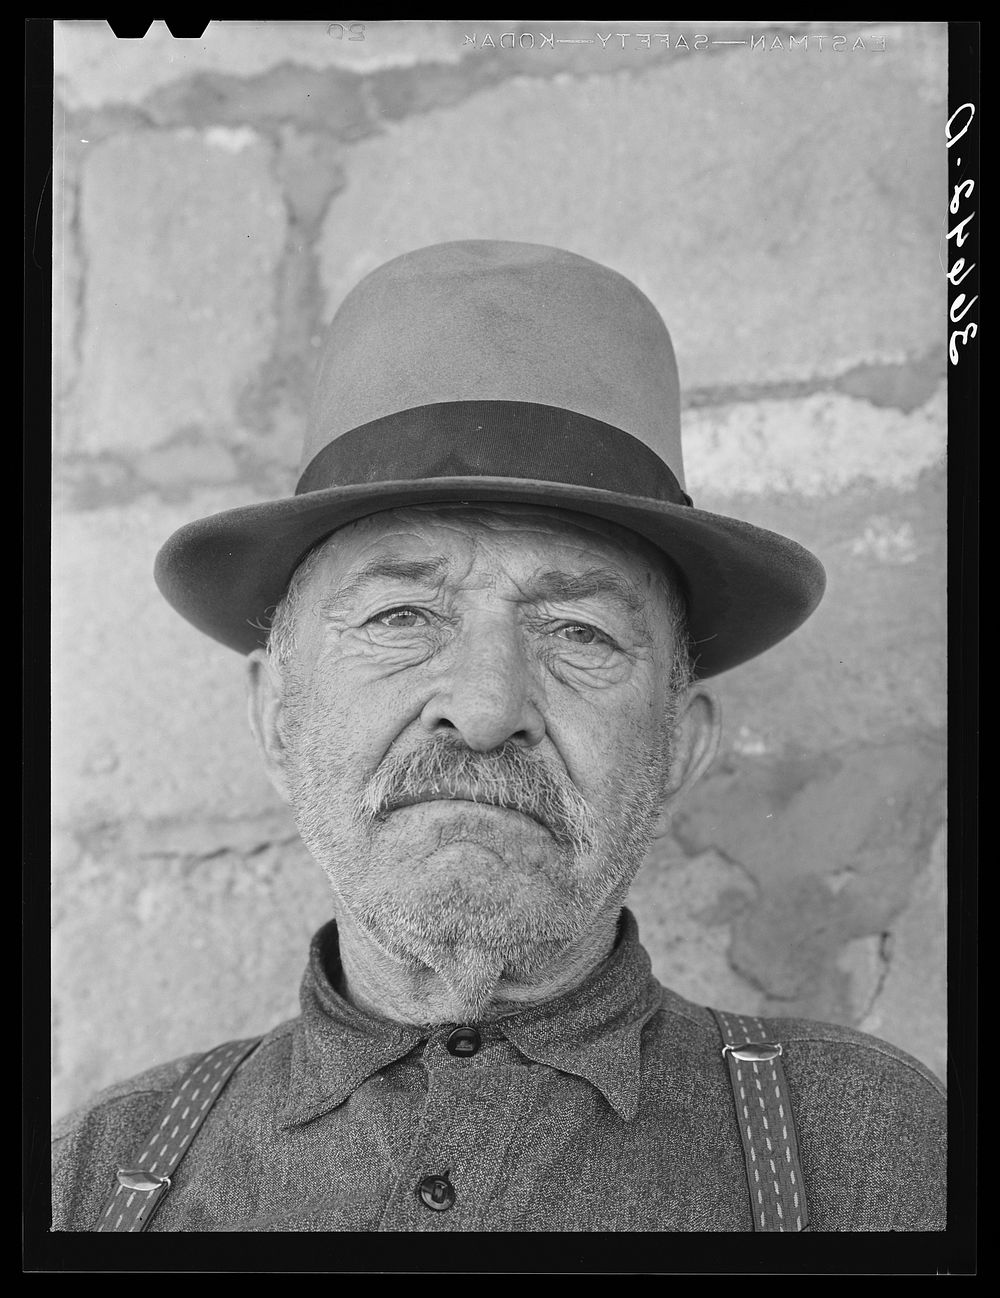 [Untitled photo, possibly related to: Uncle Bill, old character living at Reserve, New Mexico. He was once a cowboy rancher.…